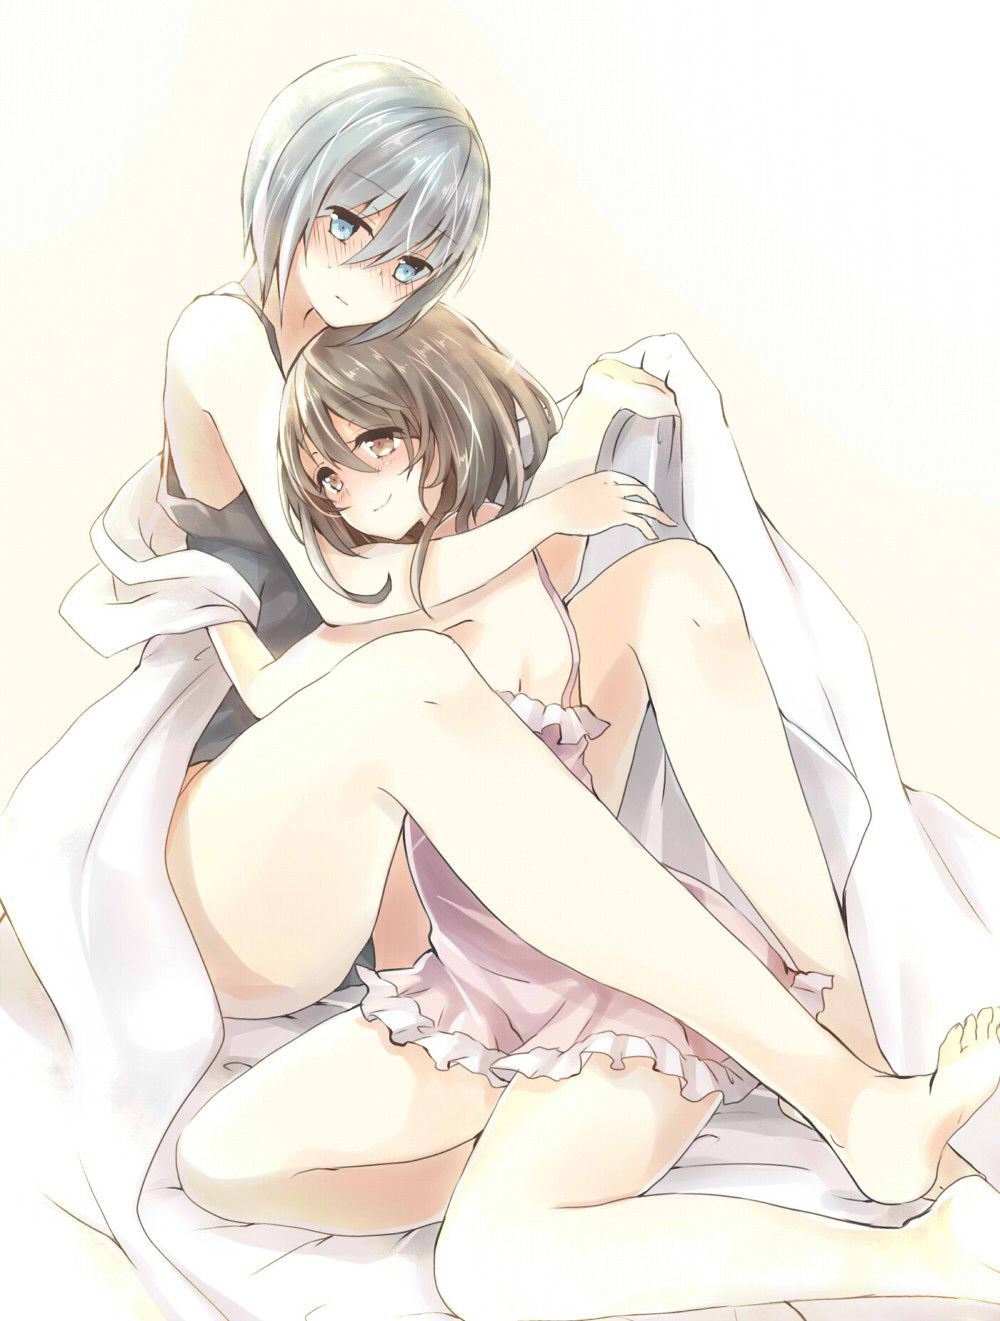 Erotic images coming out of Yuri! 11